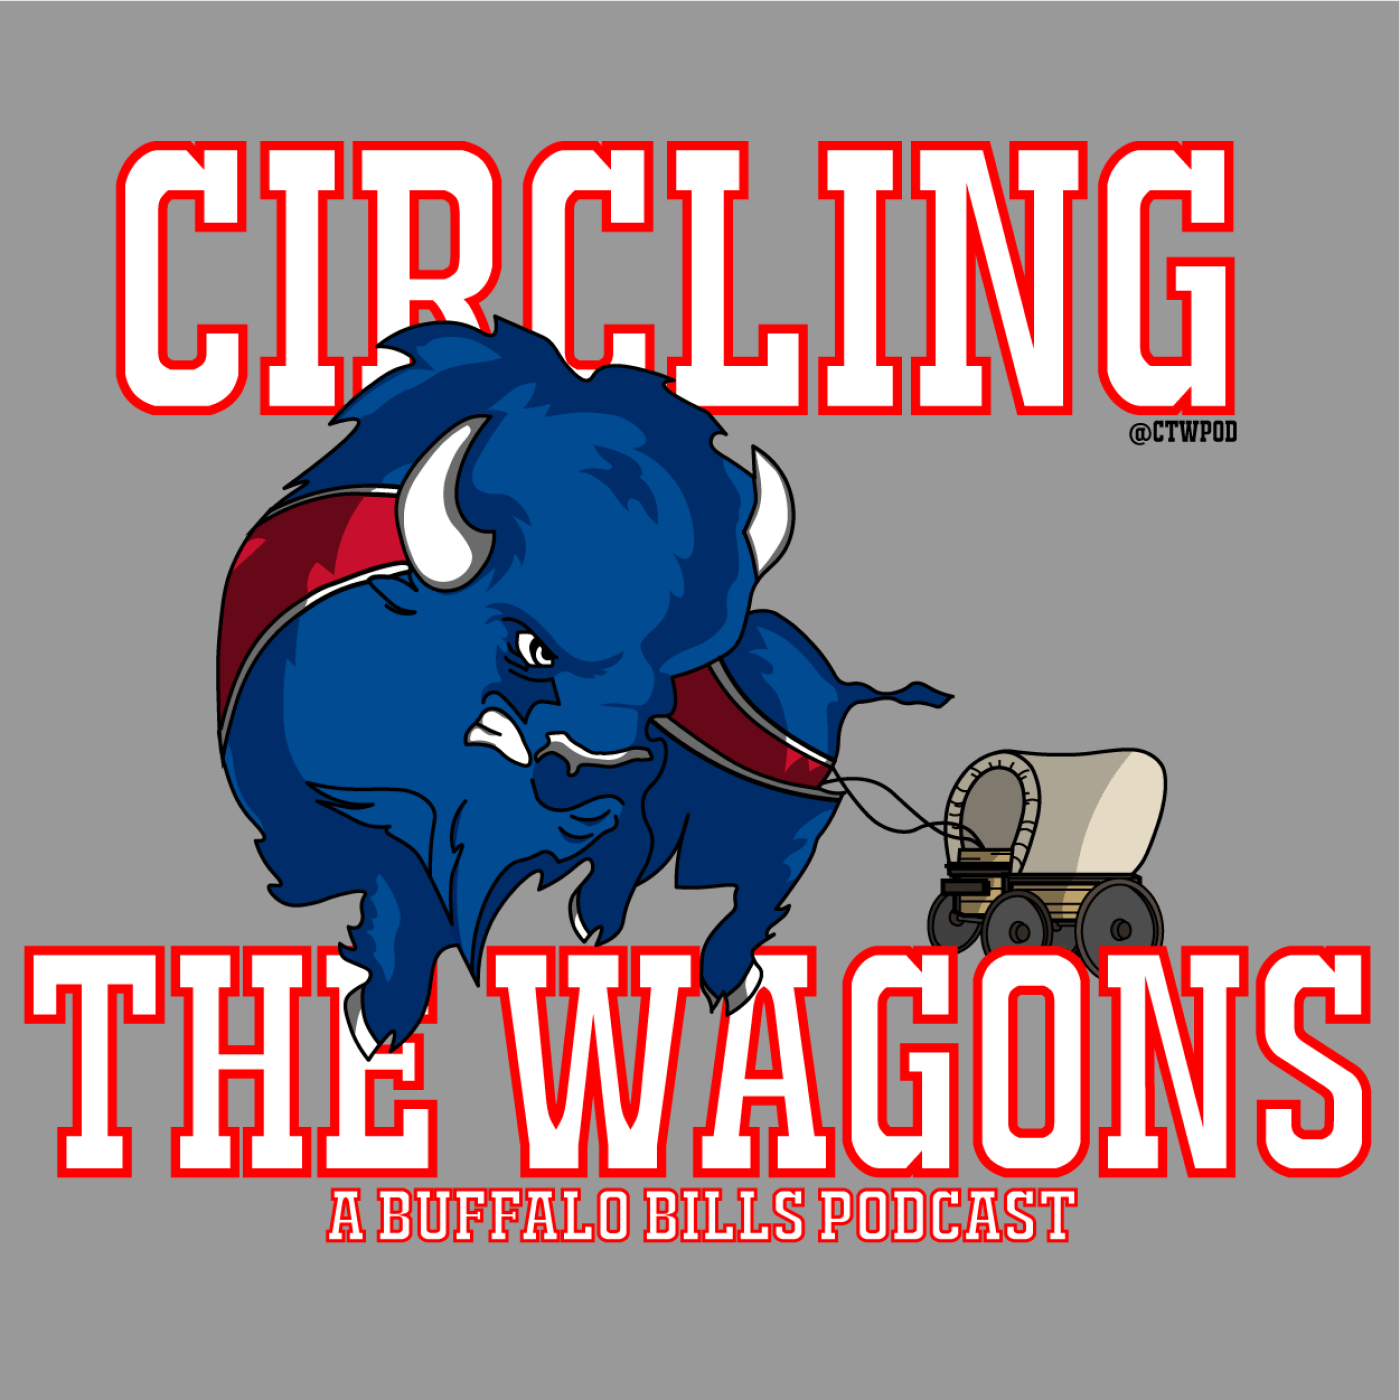 Circling the Wagons: Best of 2019 Offseason/Preseason, Bills/Lions Thoughts